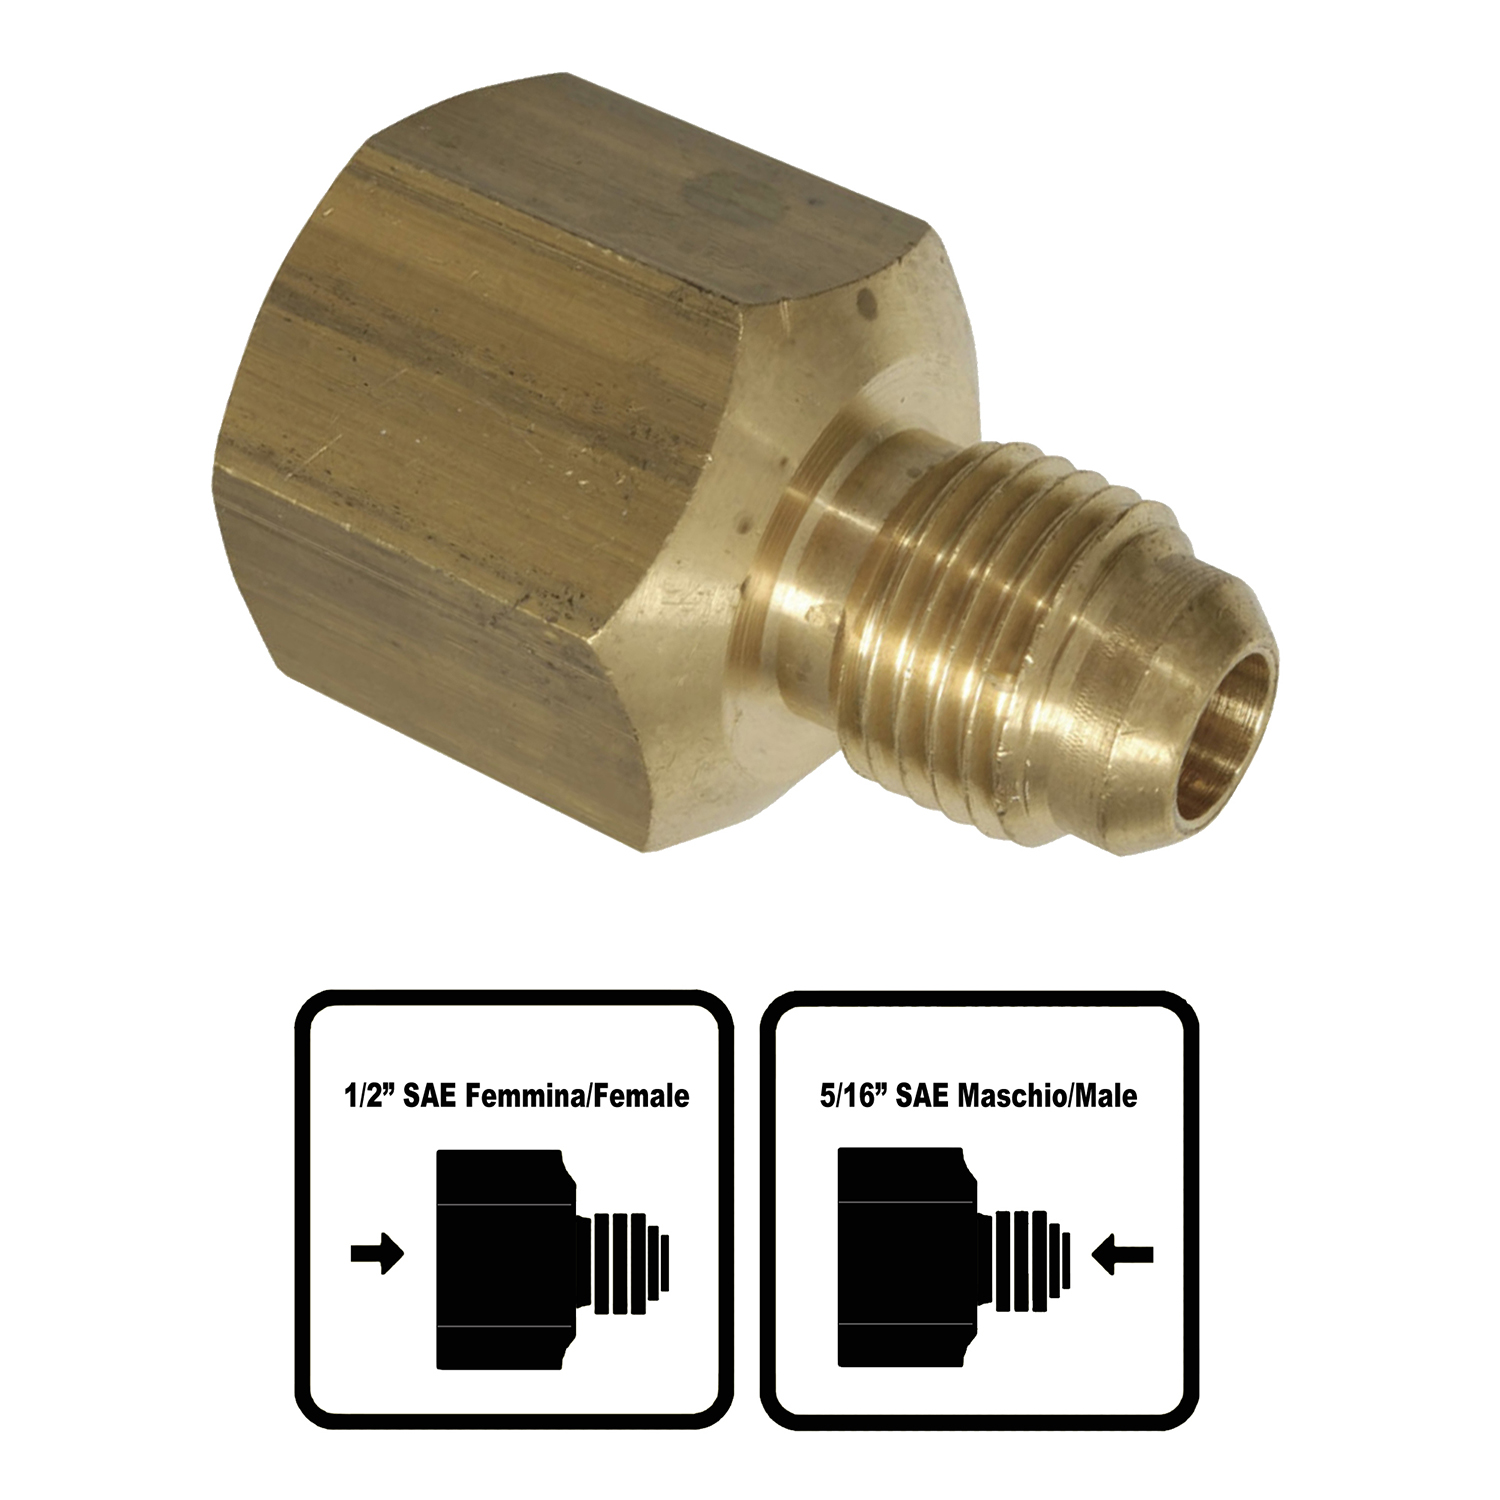 Adapter for Fieldpiece vacuum pumps - from 1/2 SAE female to 5/16 SAE male